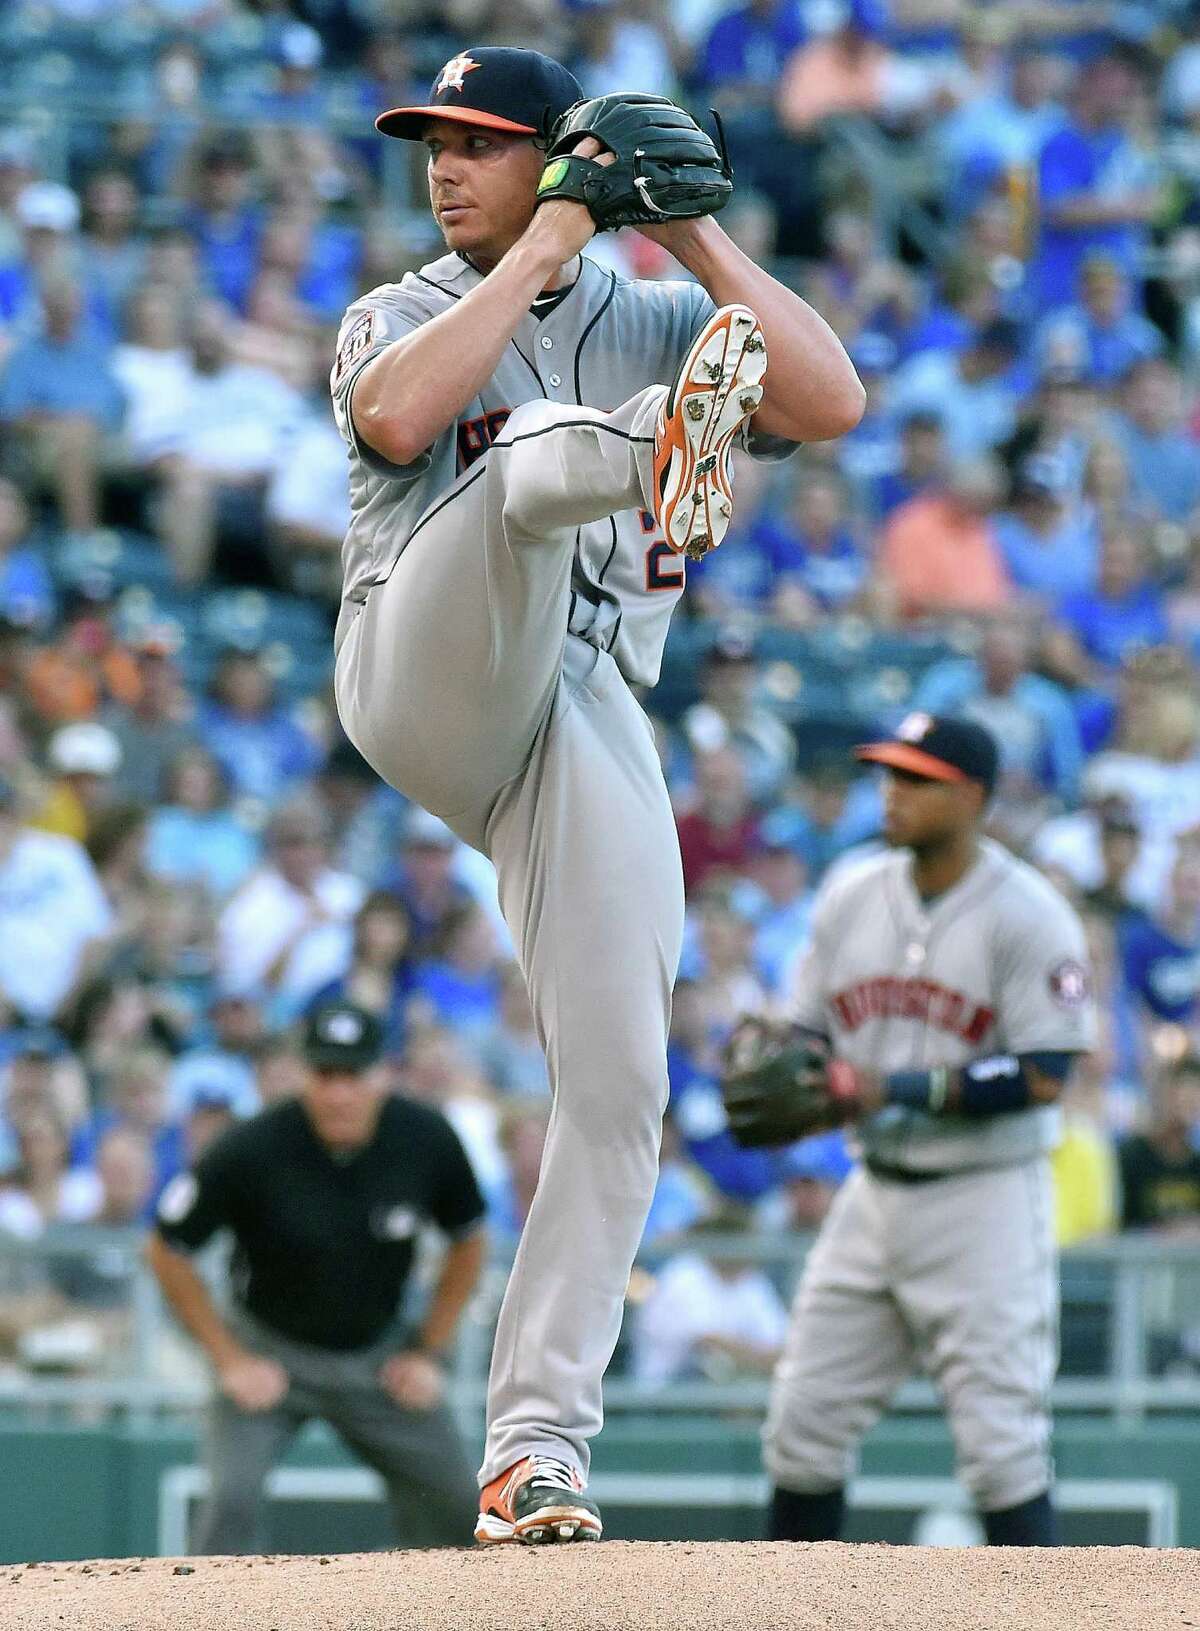 Lefthander Scott Kazmir threw seven shutout innings in his Astros debut Friday night after being acquired from the Athletics for two prospects Thursday. Kazmir limited the Royals to three hits and lowered his ERA to 2.24.﻿